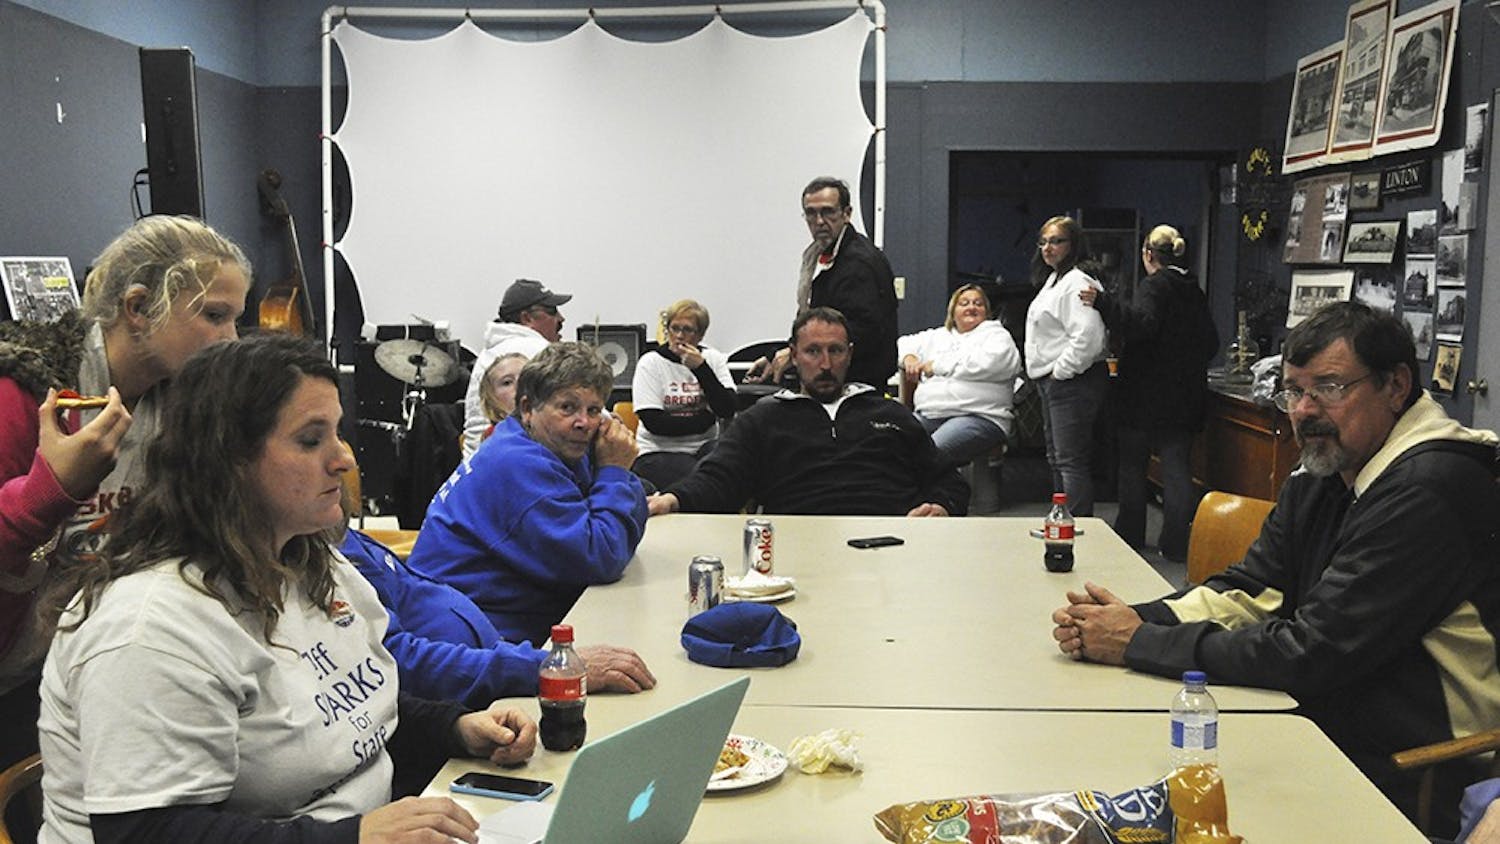 In Linton, Sparks' headquarters or an art studio rented out by the State Democratic Party, Sparks' supporters and family gathered around to keep updated on election results Tuesday, Nov. 4. The studio had no computers or ways to access the Internet so vote tallies were monitored using family members' iPhones. Terri Neighbors, Sparks' treasurer, used a borrowed computer to check the scores throughout the night.